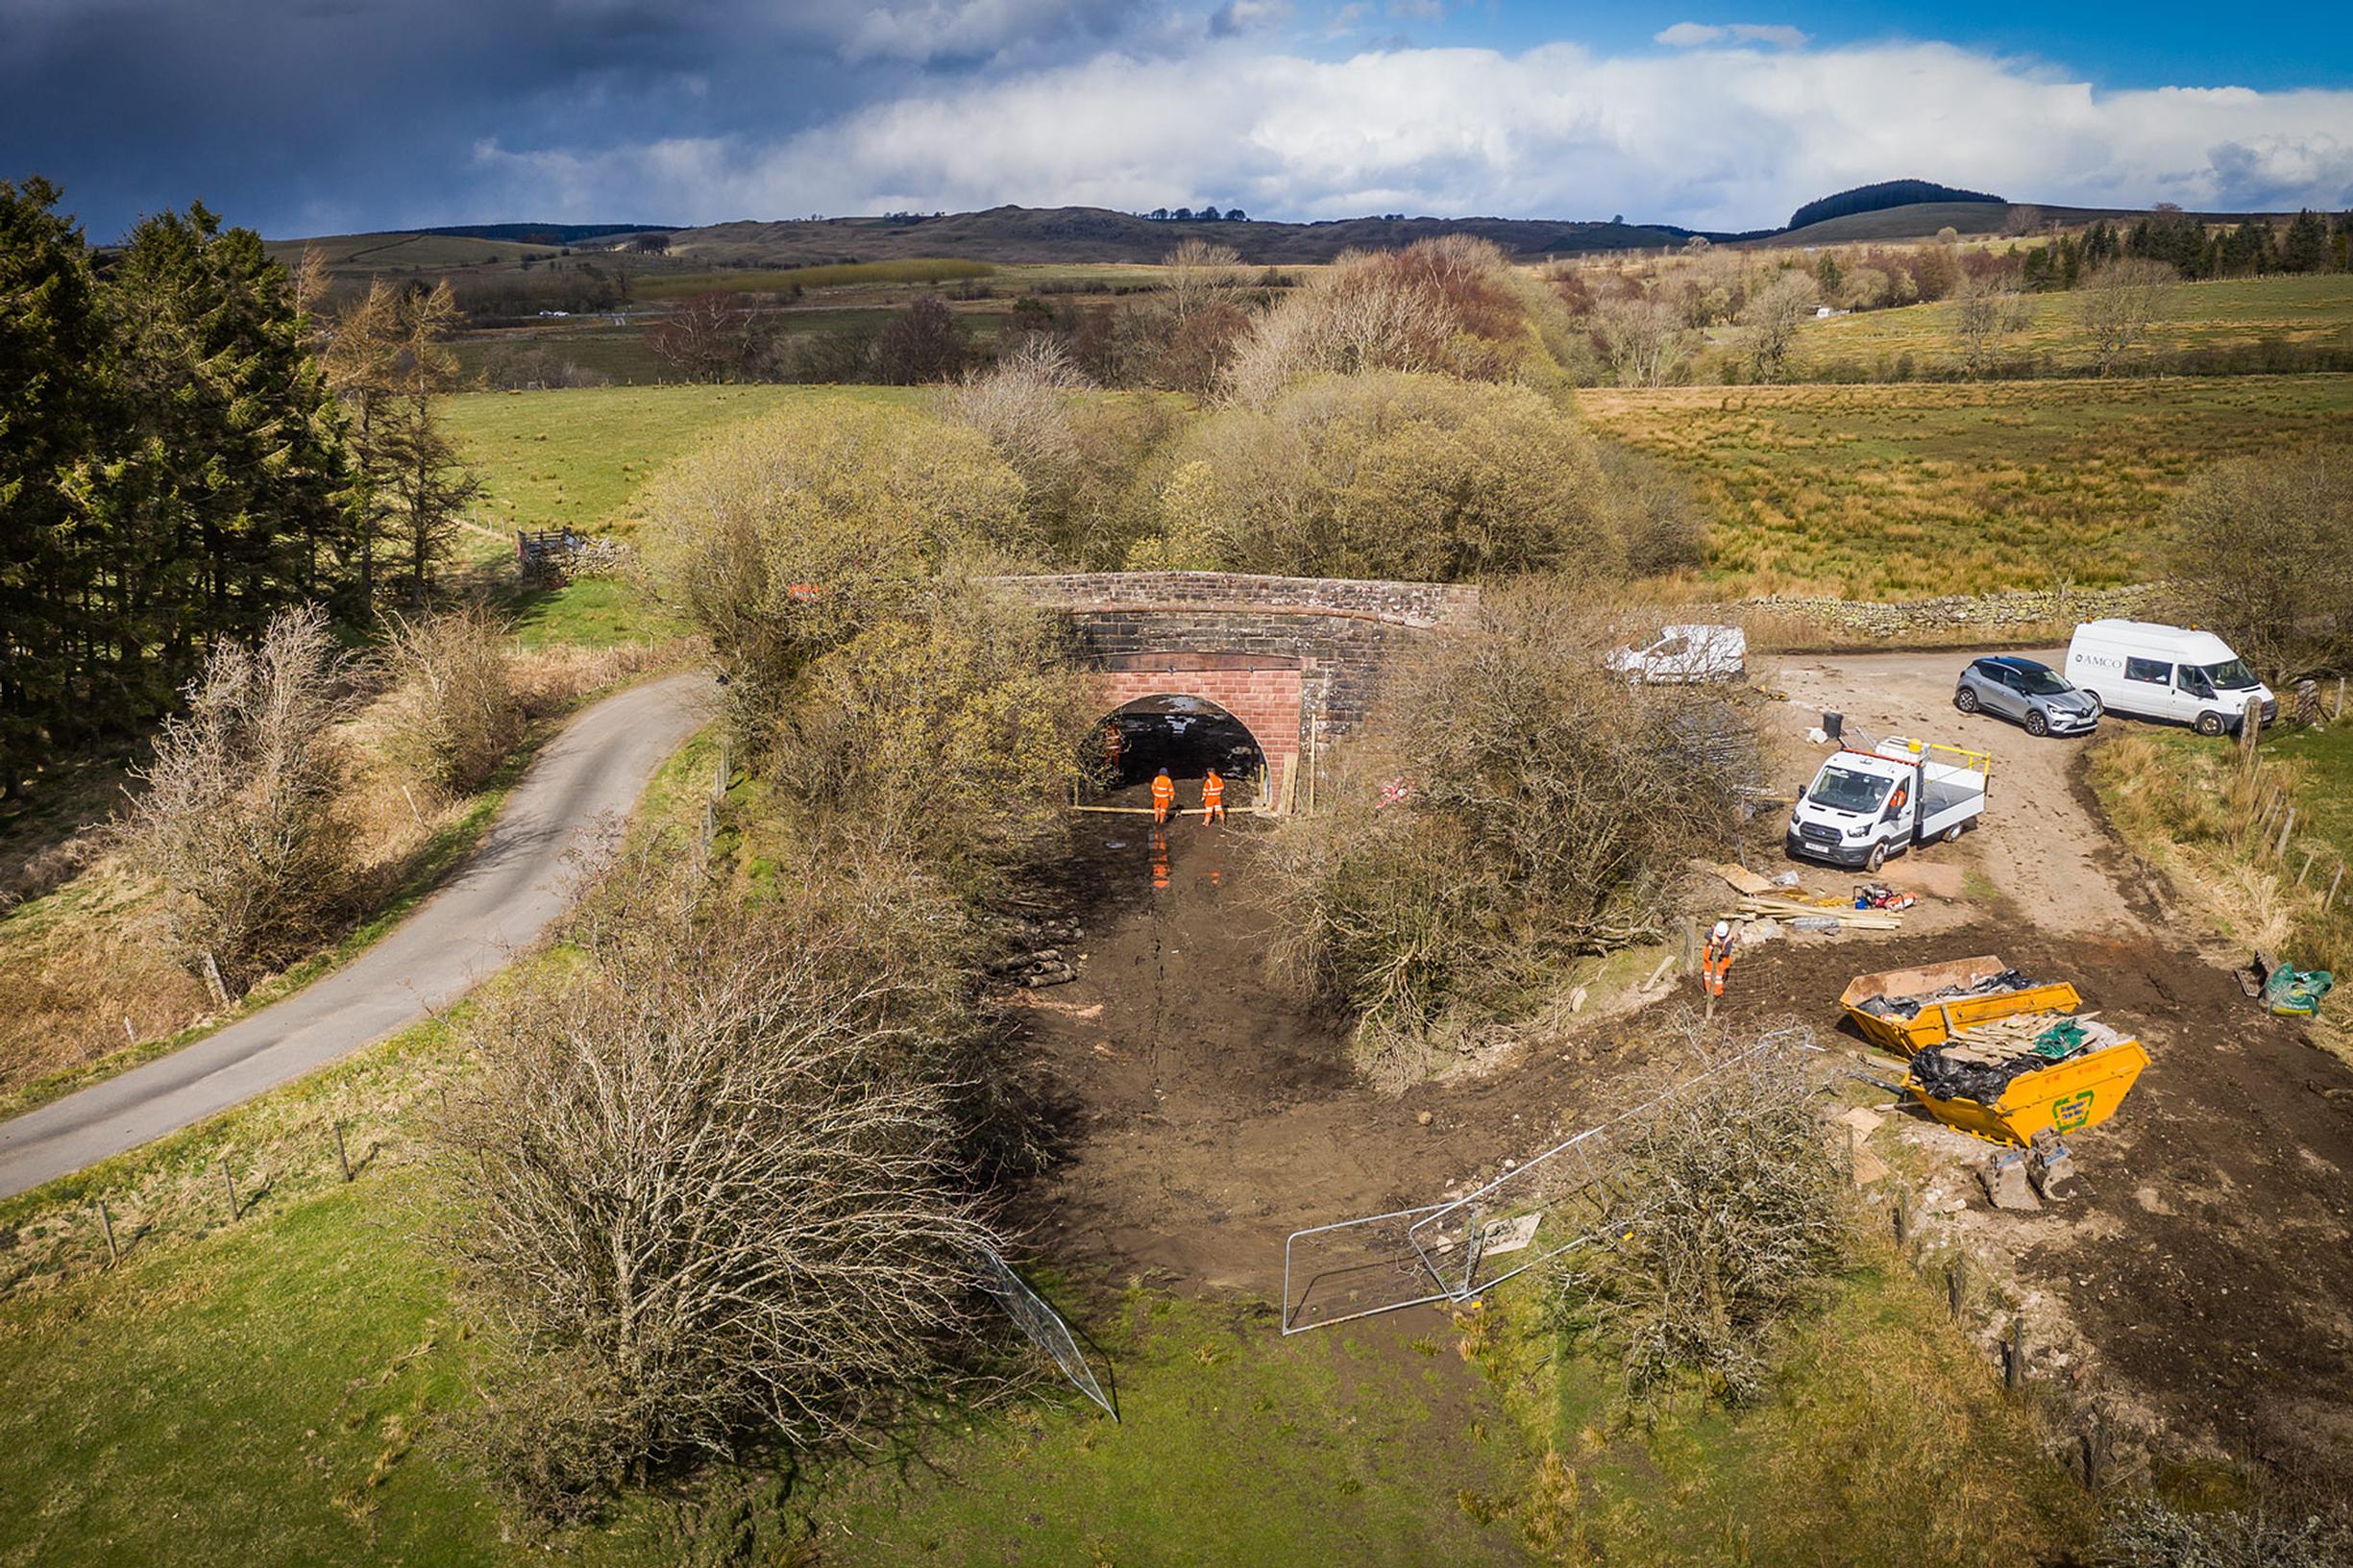 At Troutbeck in Cumbria contractors complete the partial infilling of a bridge on the former Penrith to Keswick railway, which is the subject of a reopening campaign. The installed archway is not sufficiently large for trains to pass through